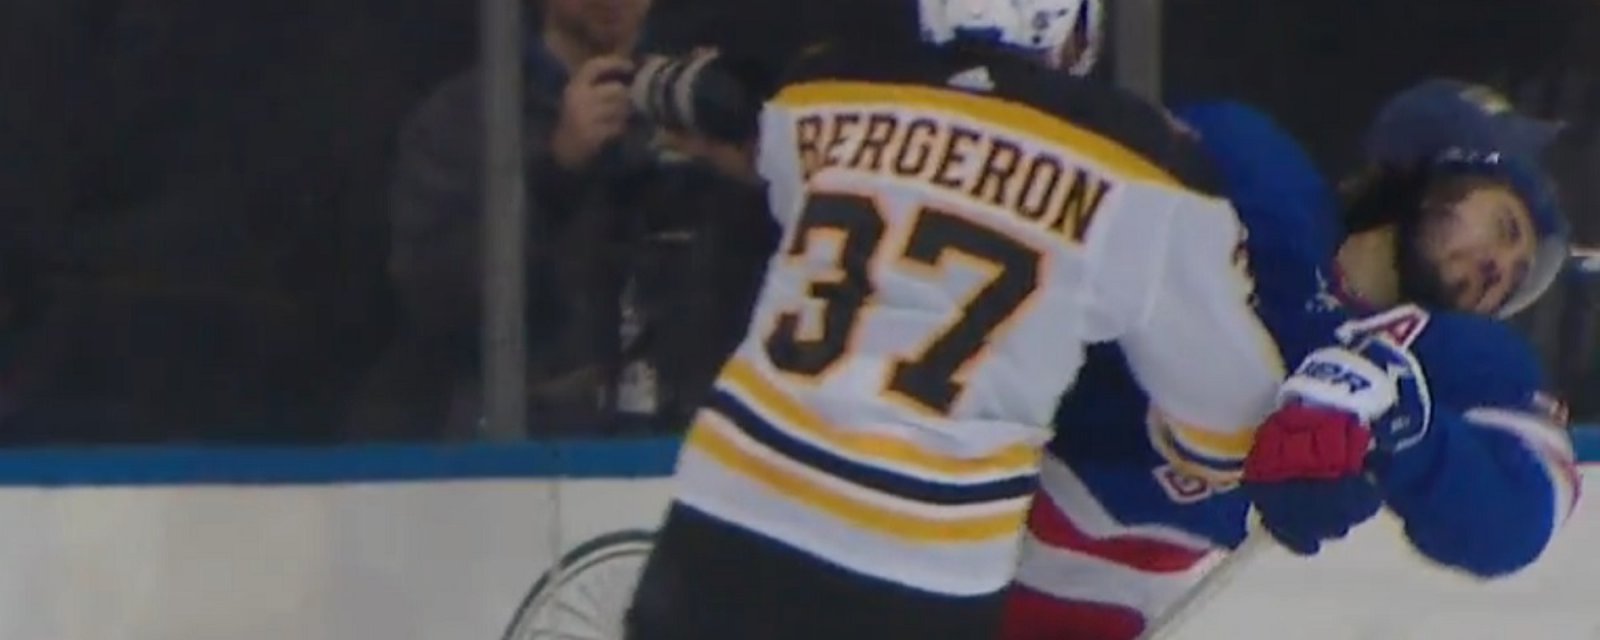 Huge hit from Patrice Bergeron knocks Mika Zibanejad out of the game.